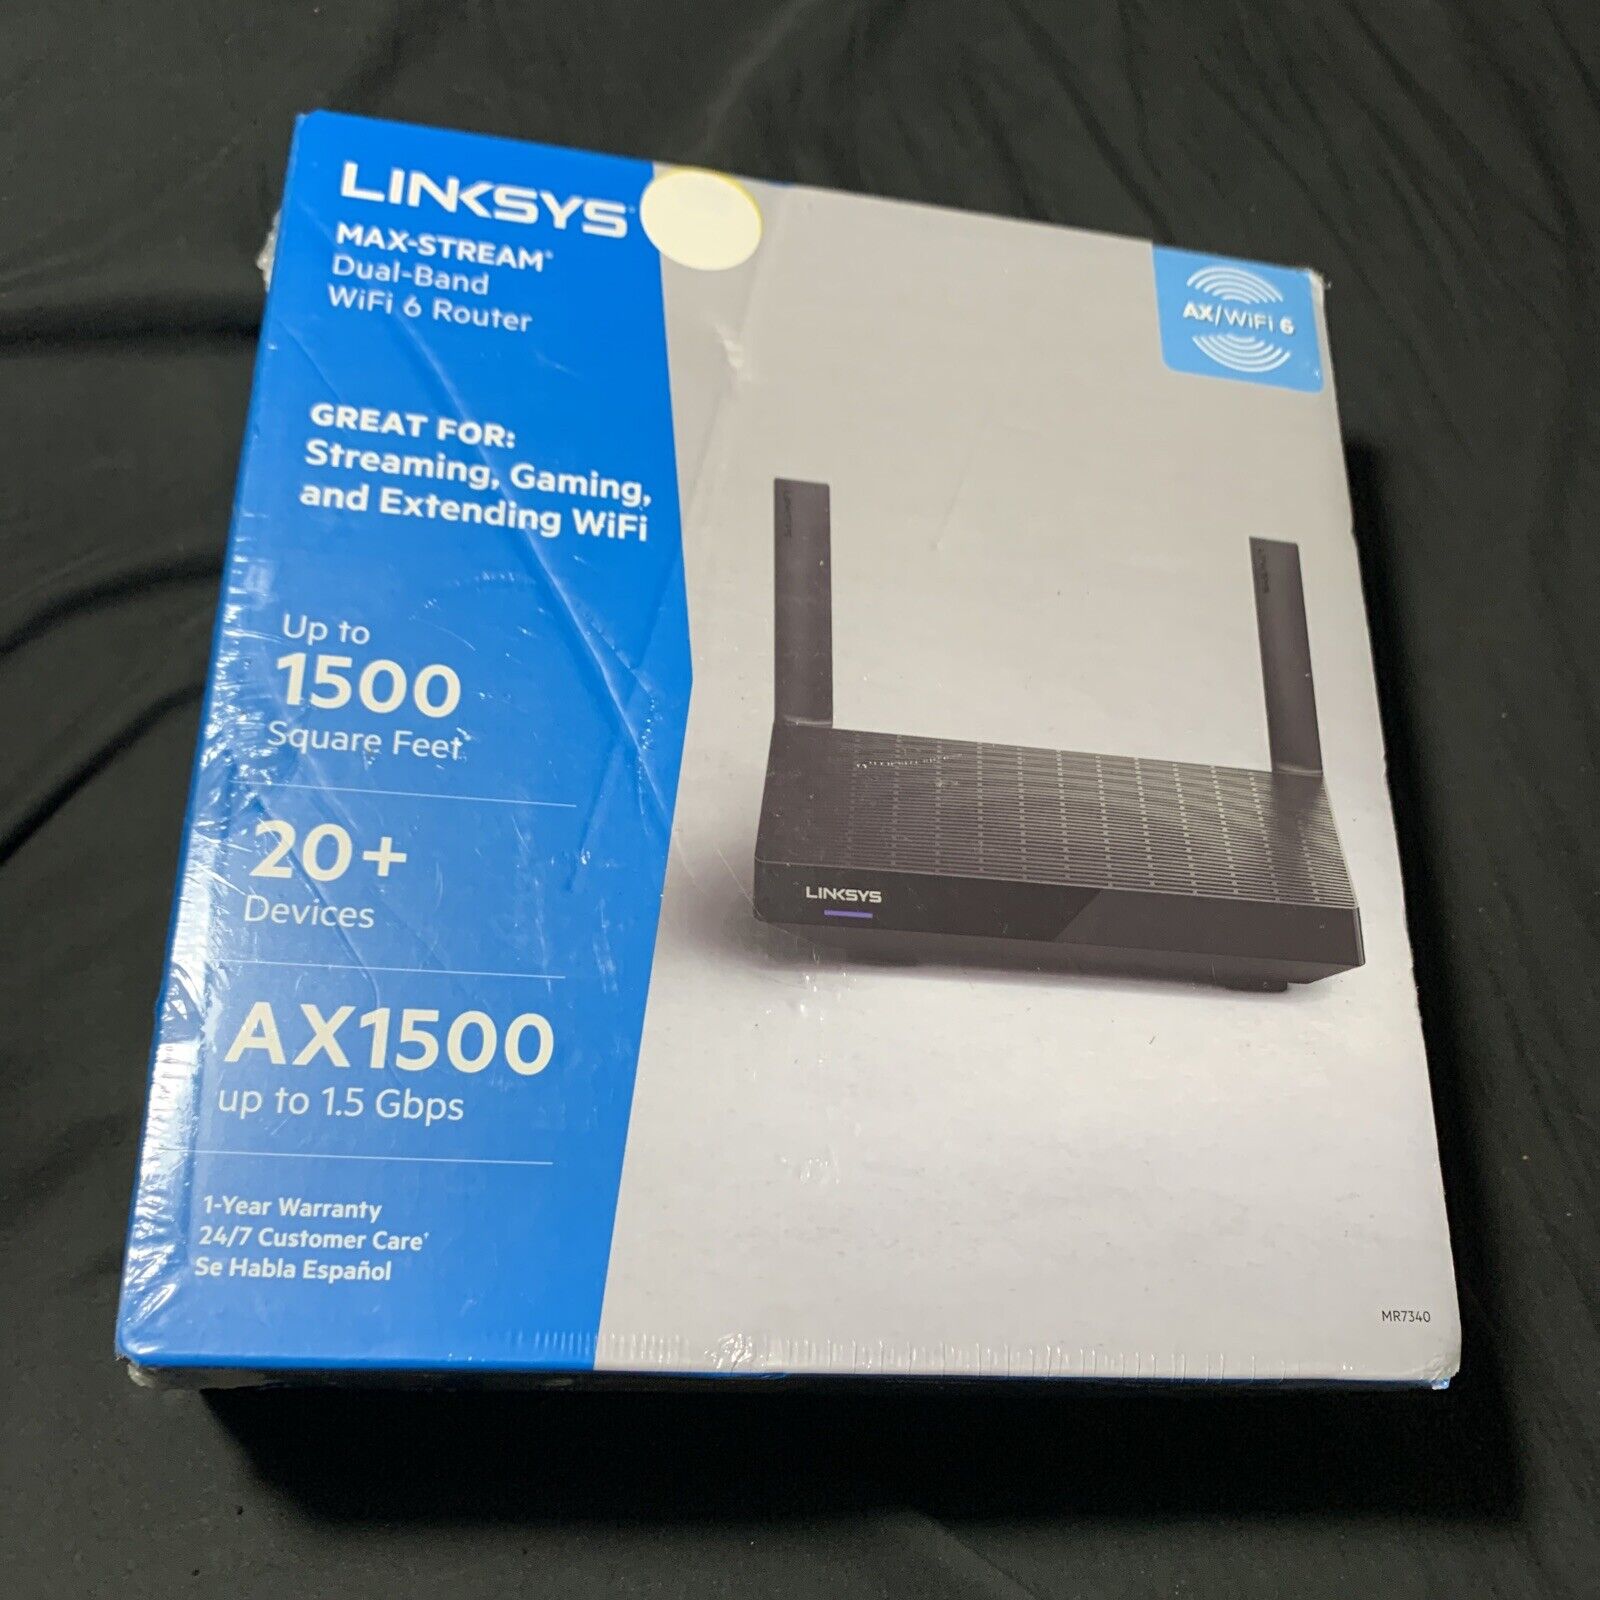 Linksys Dual-Band MAX-STREAM Mesh WiFi 6 Router AX1500 (MR7340) - NEW SEALED